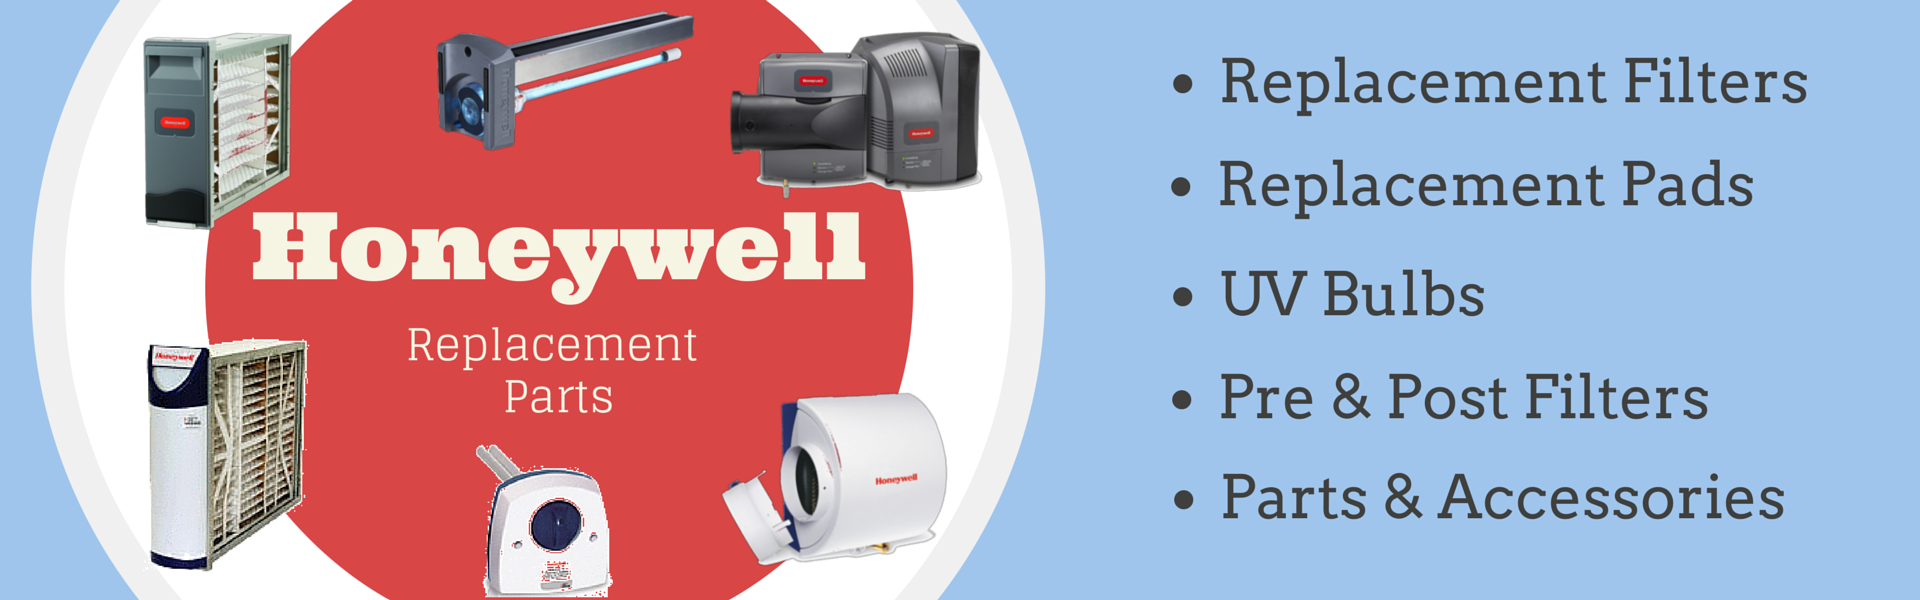 Honeywell Replacement Air Filters, Humidifier Pads, UV Bulbs and Parts.